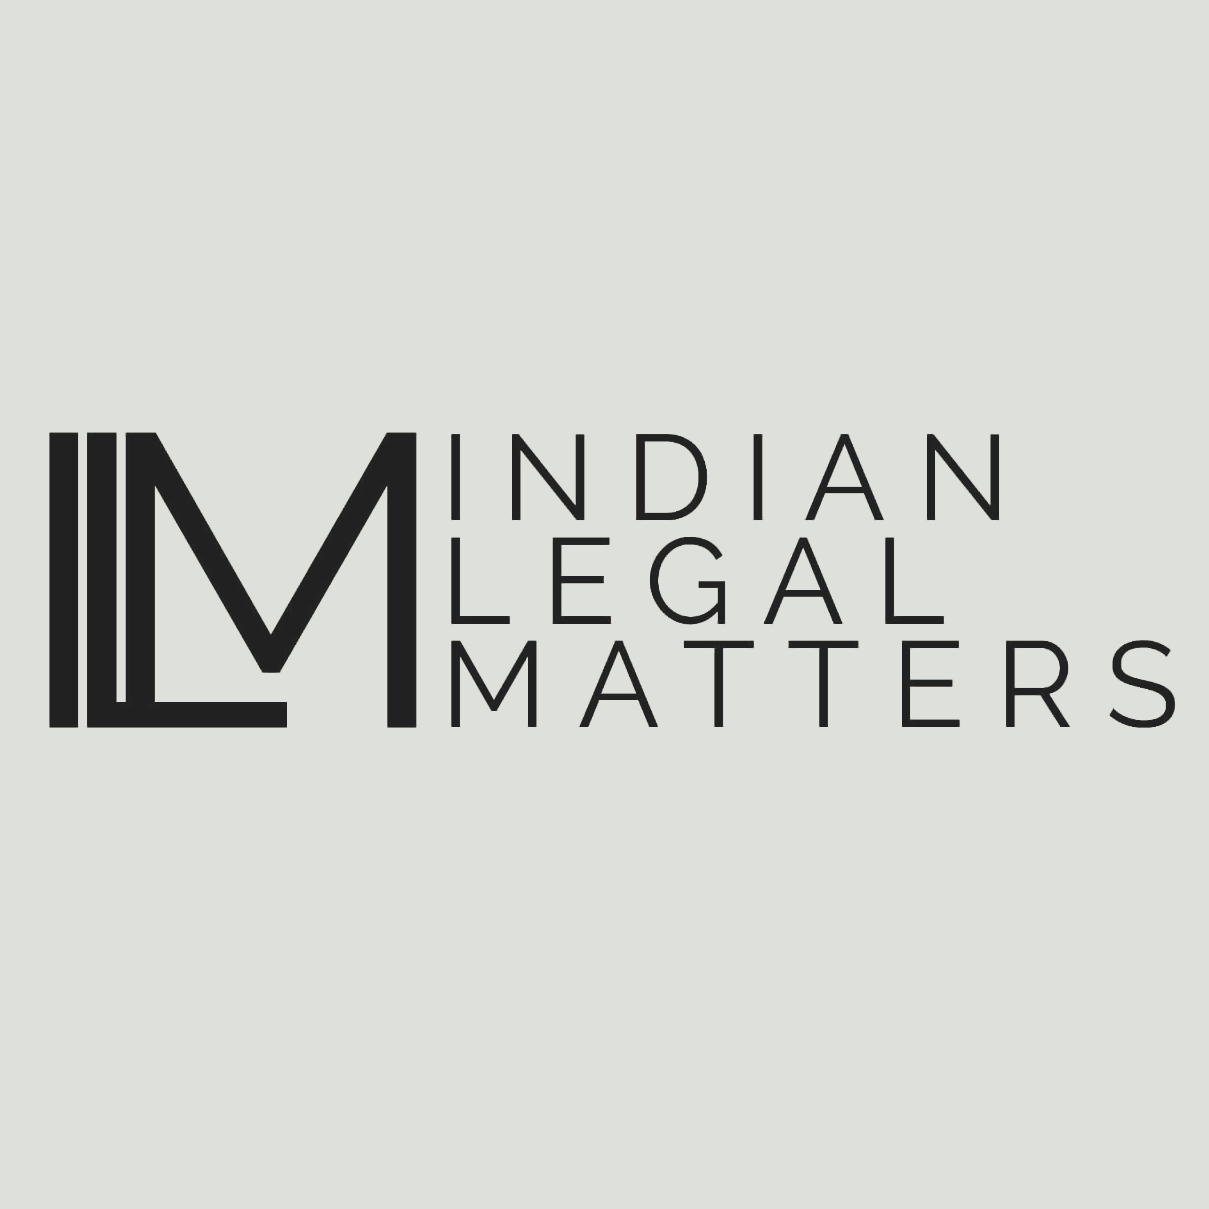 Company logo of Indian Legal Matters